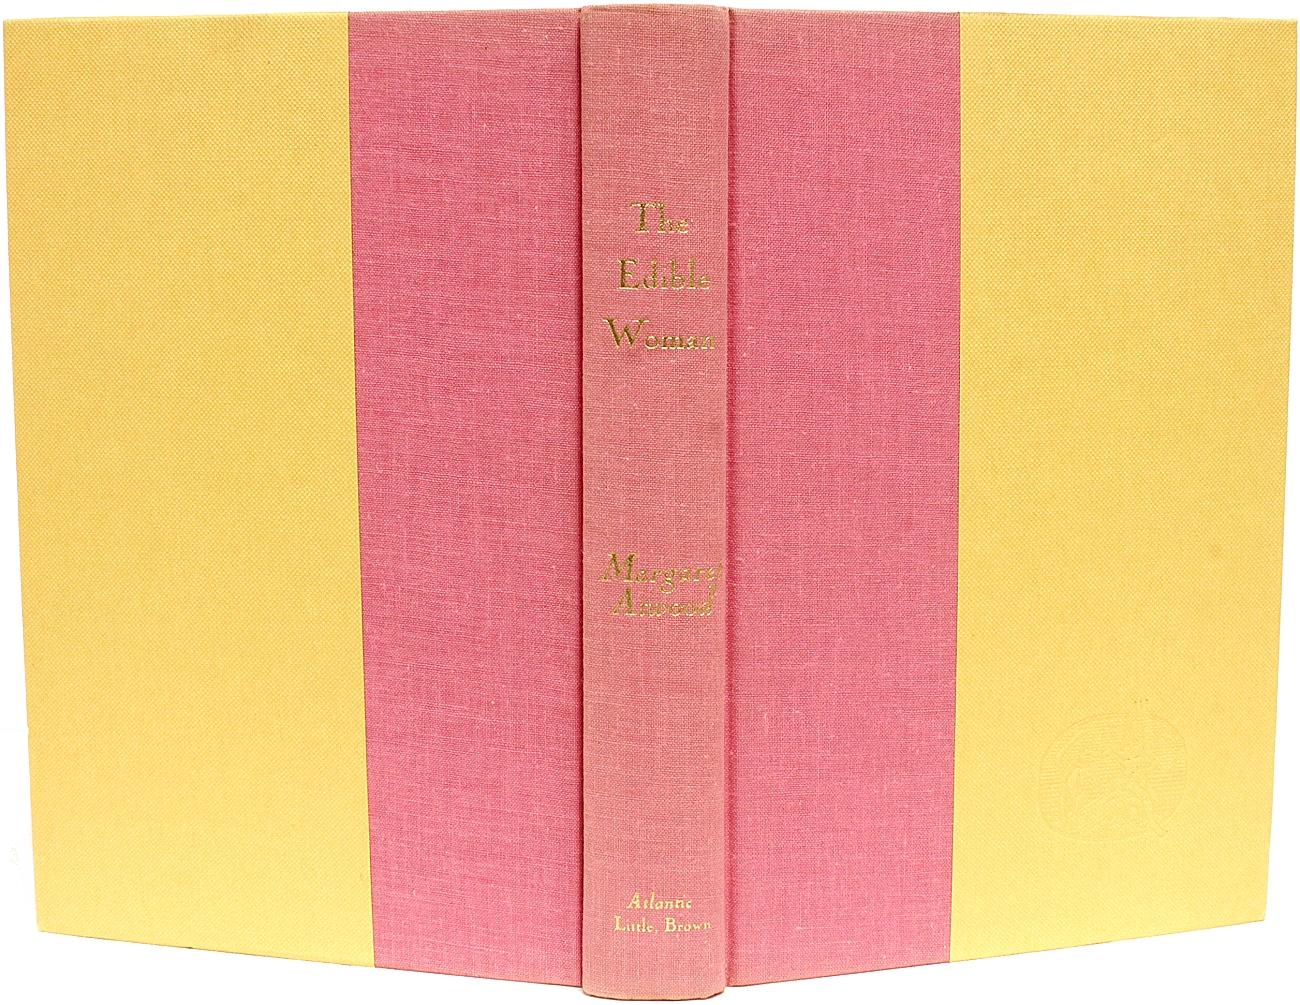 Mid-20th Century Atwood, Margaret, The Edible Woman, First American Edition Presentation Copy For Sale